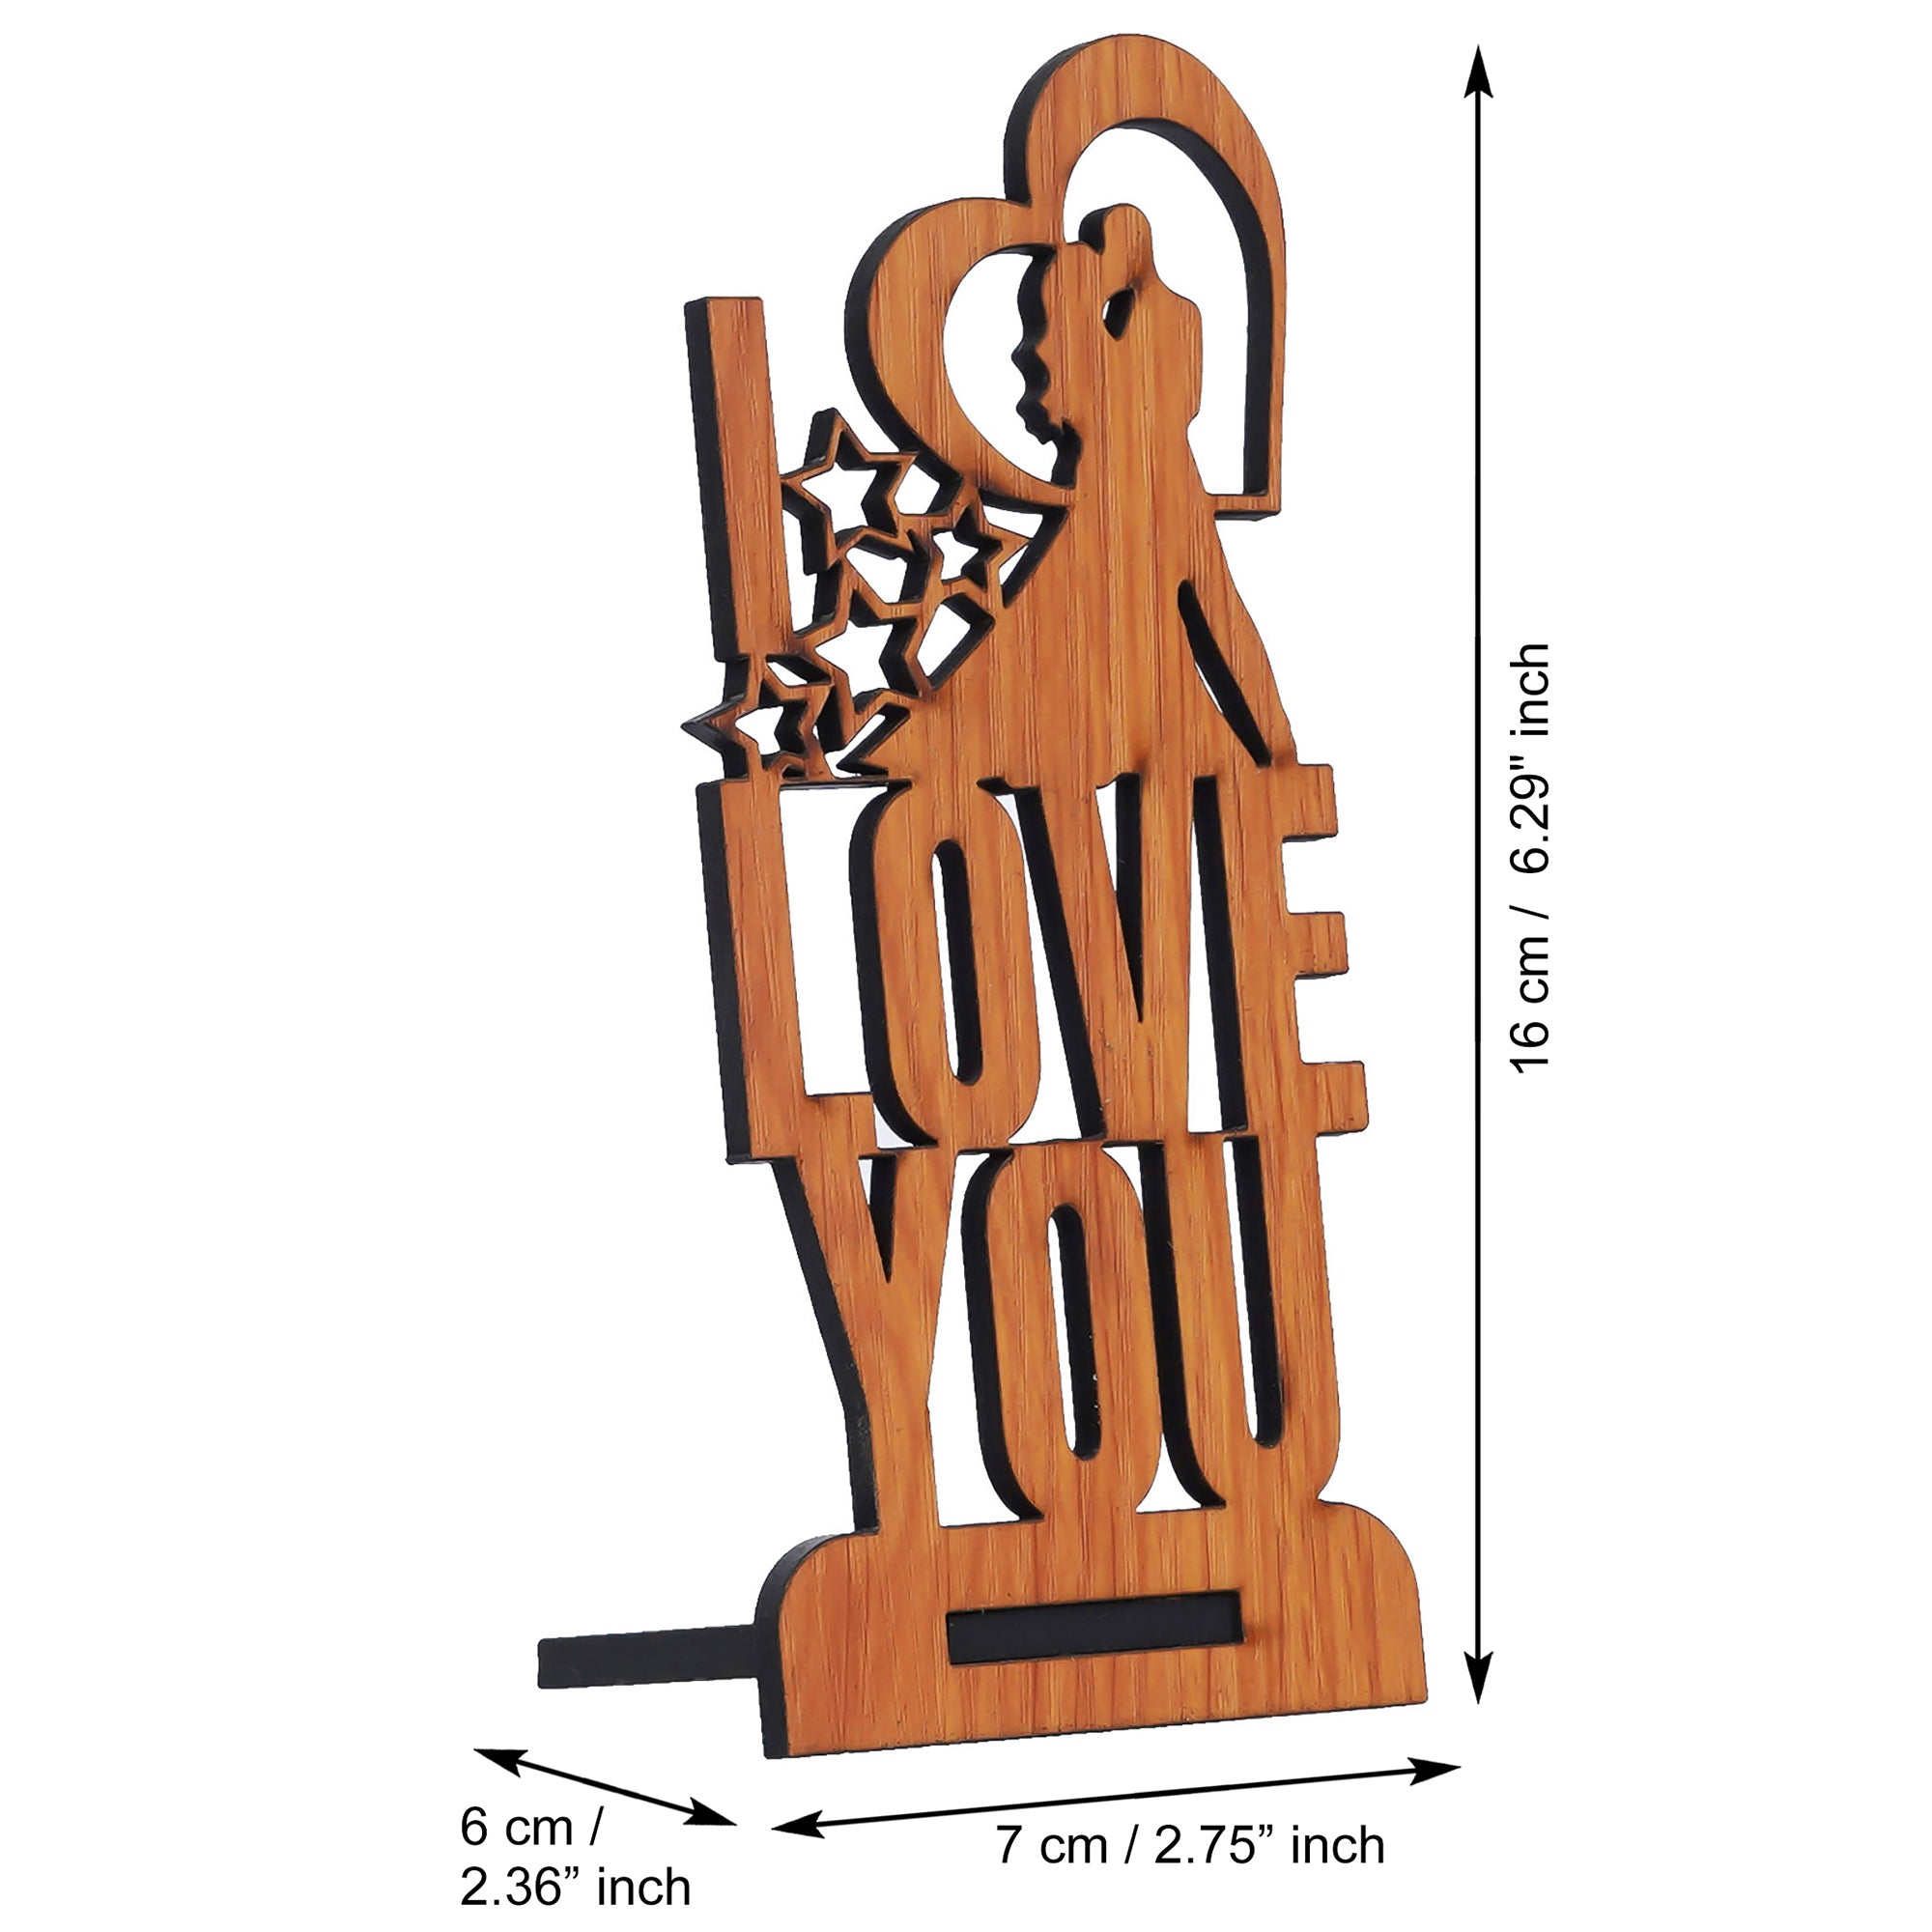 Valentine Combo of "Love You" Wooden Showpiece With Stand, Heart Shaped Gift Box Set with White Teddy and Red Roses 2